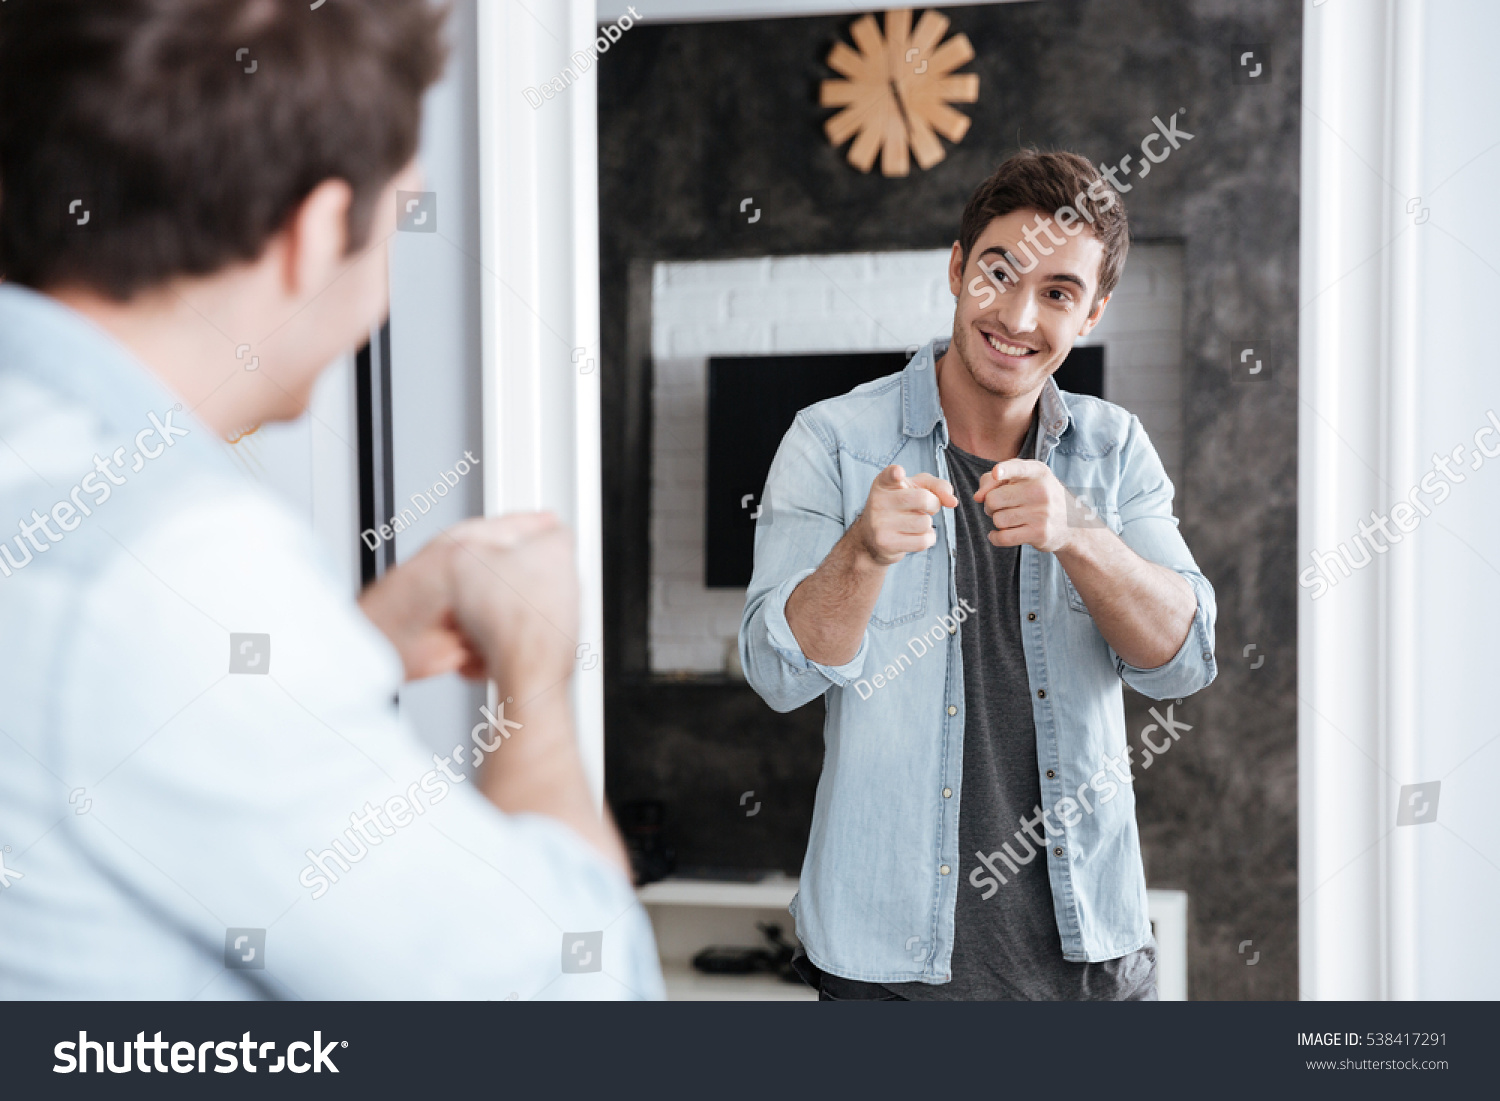 Smiling young man pointing fingers at his mirror reflection while standing at home #538417291